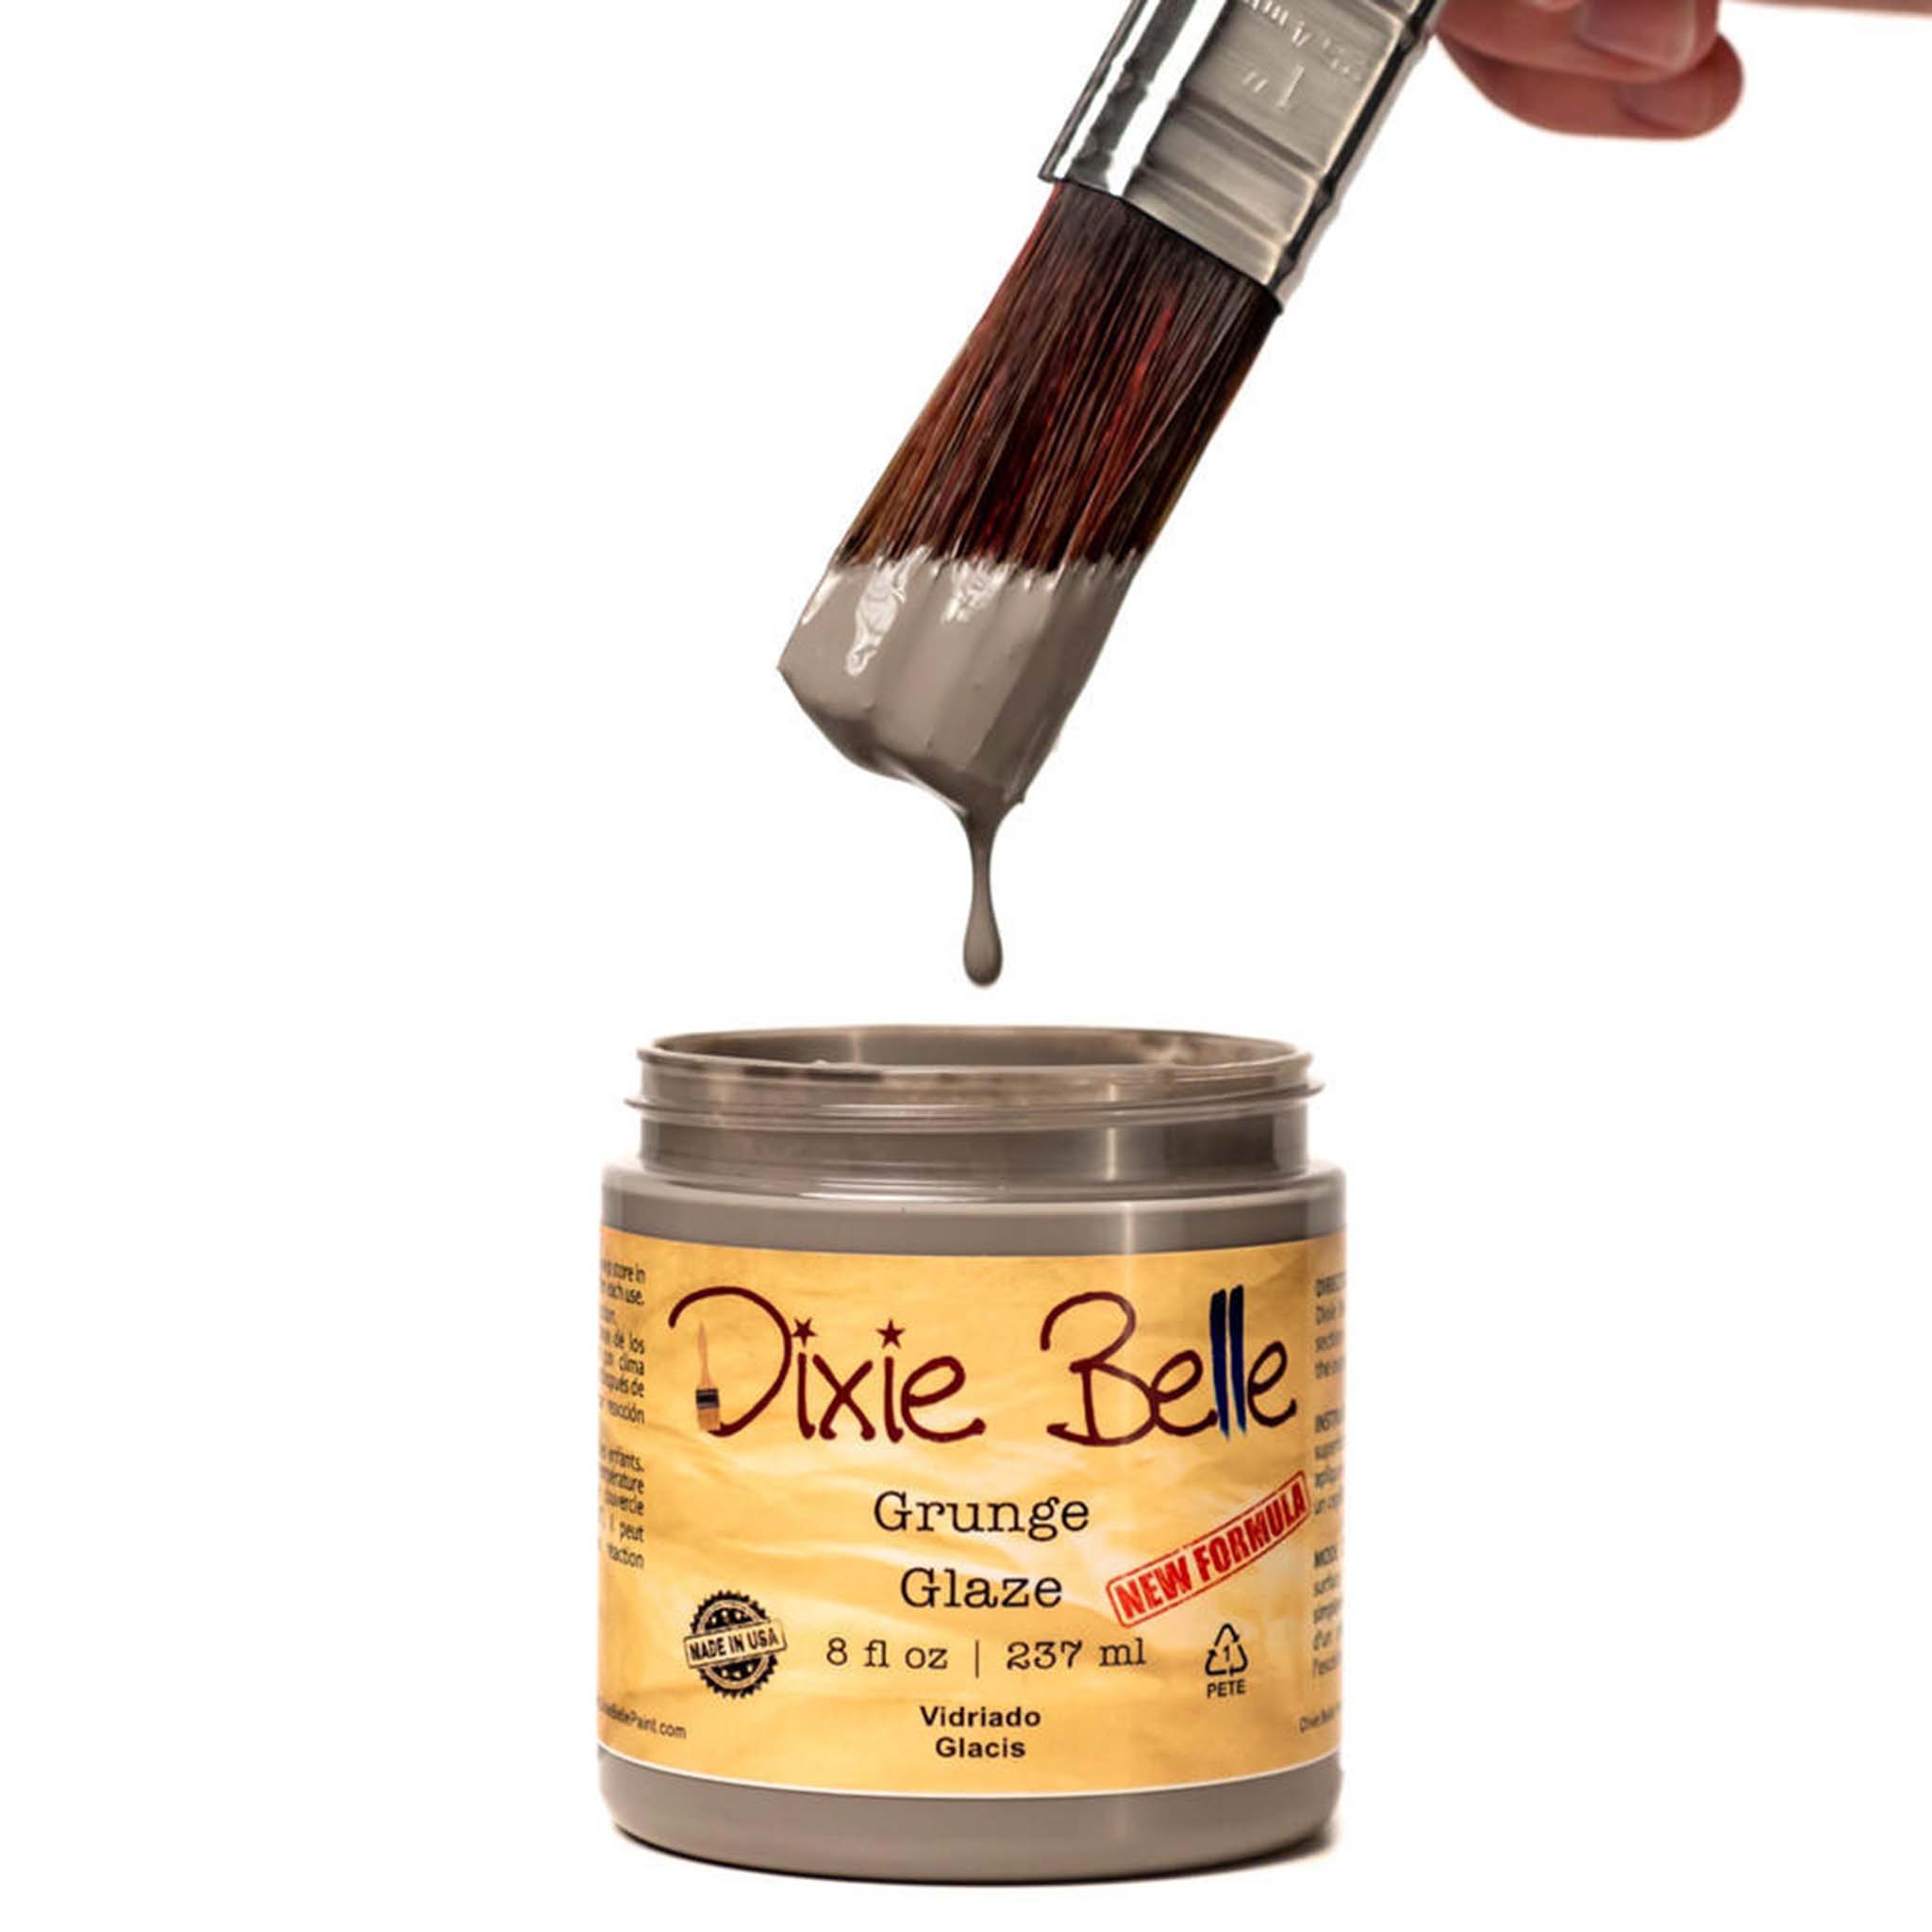 An open container of an 8oz/237ml Dixie Belle Grunge Glaze with a dripping paintbrush above it is against a white background.